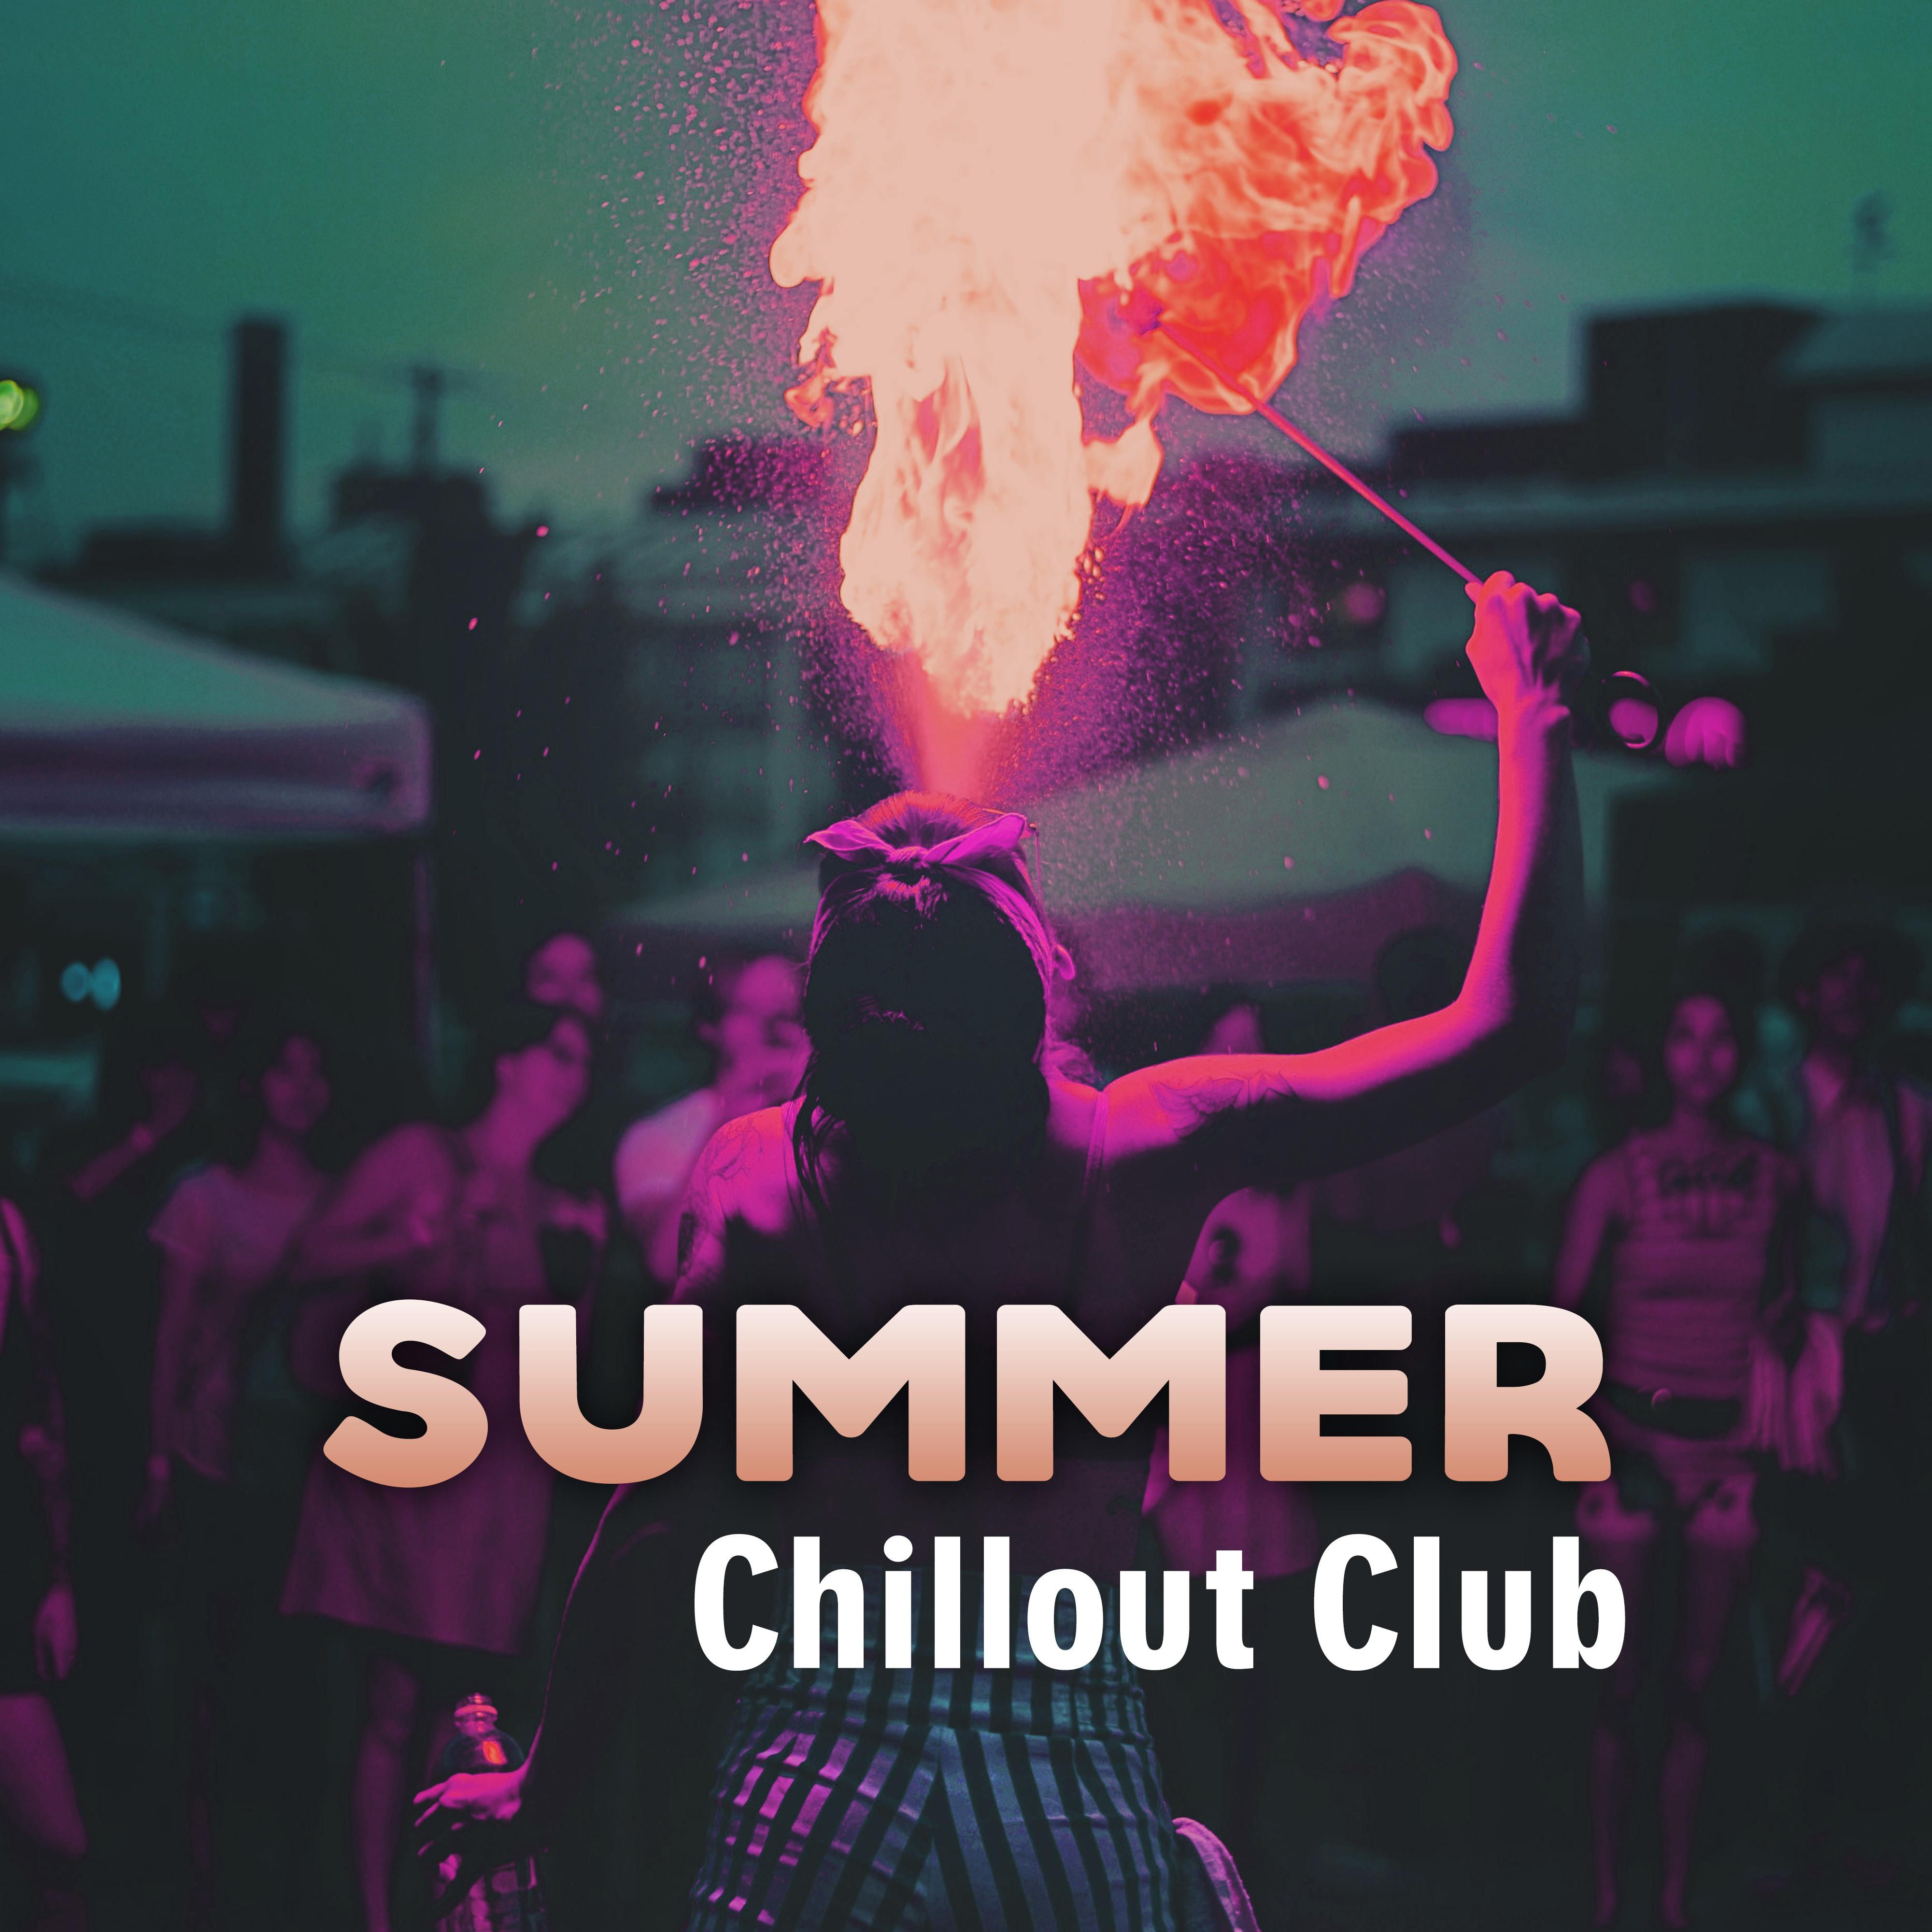 Summer Chillout Club – Chill Out 2017, Ibiza, Beach Party, Holiday Music, Relax, Summer Soltice